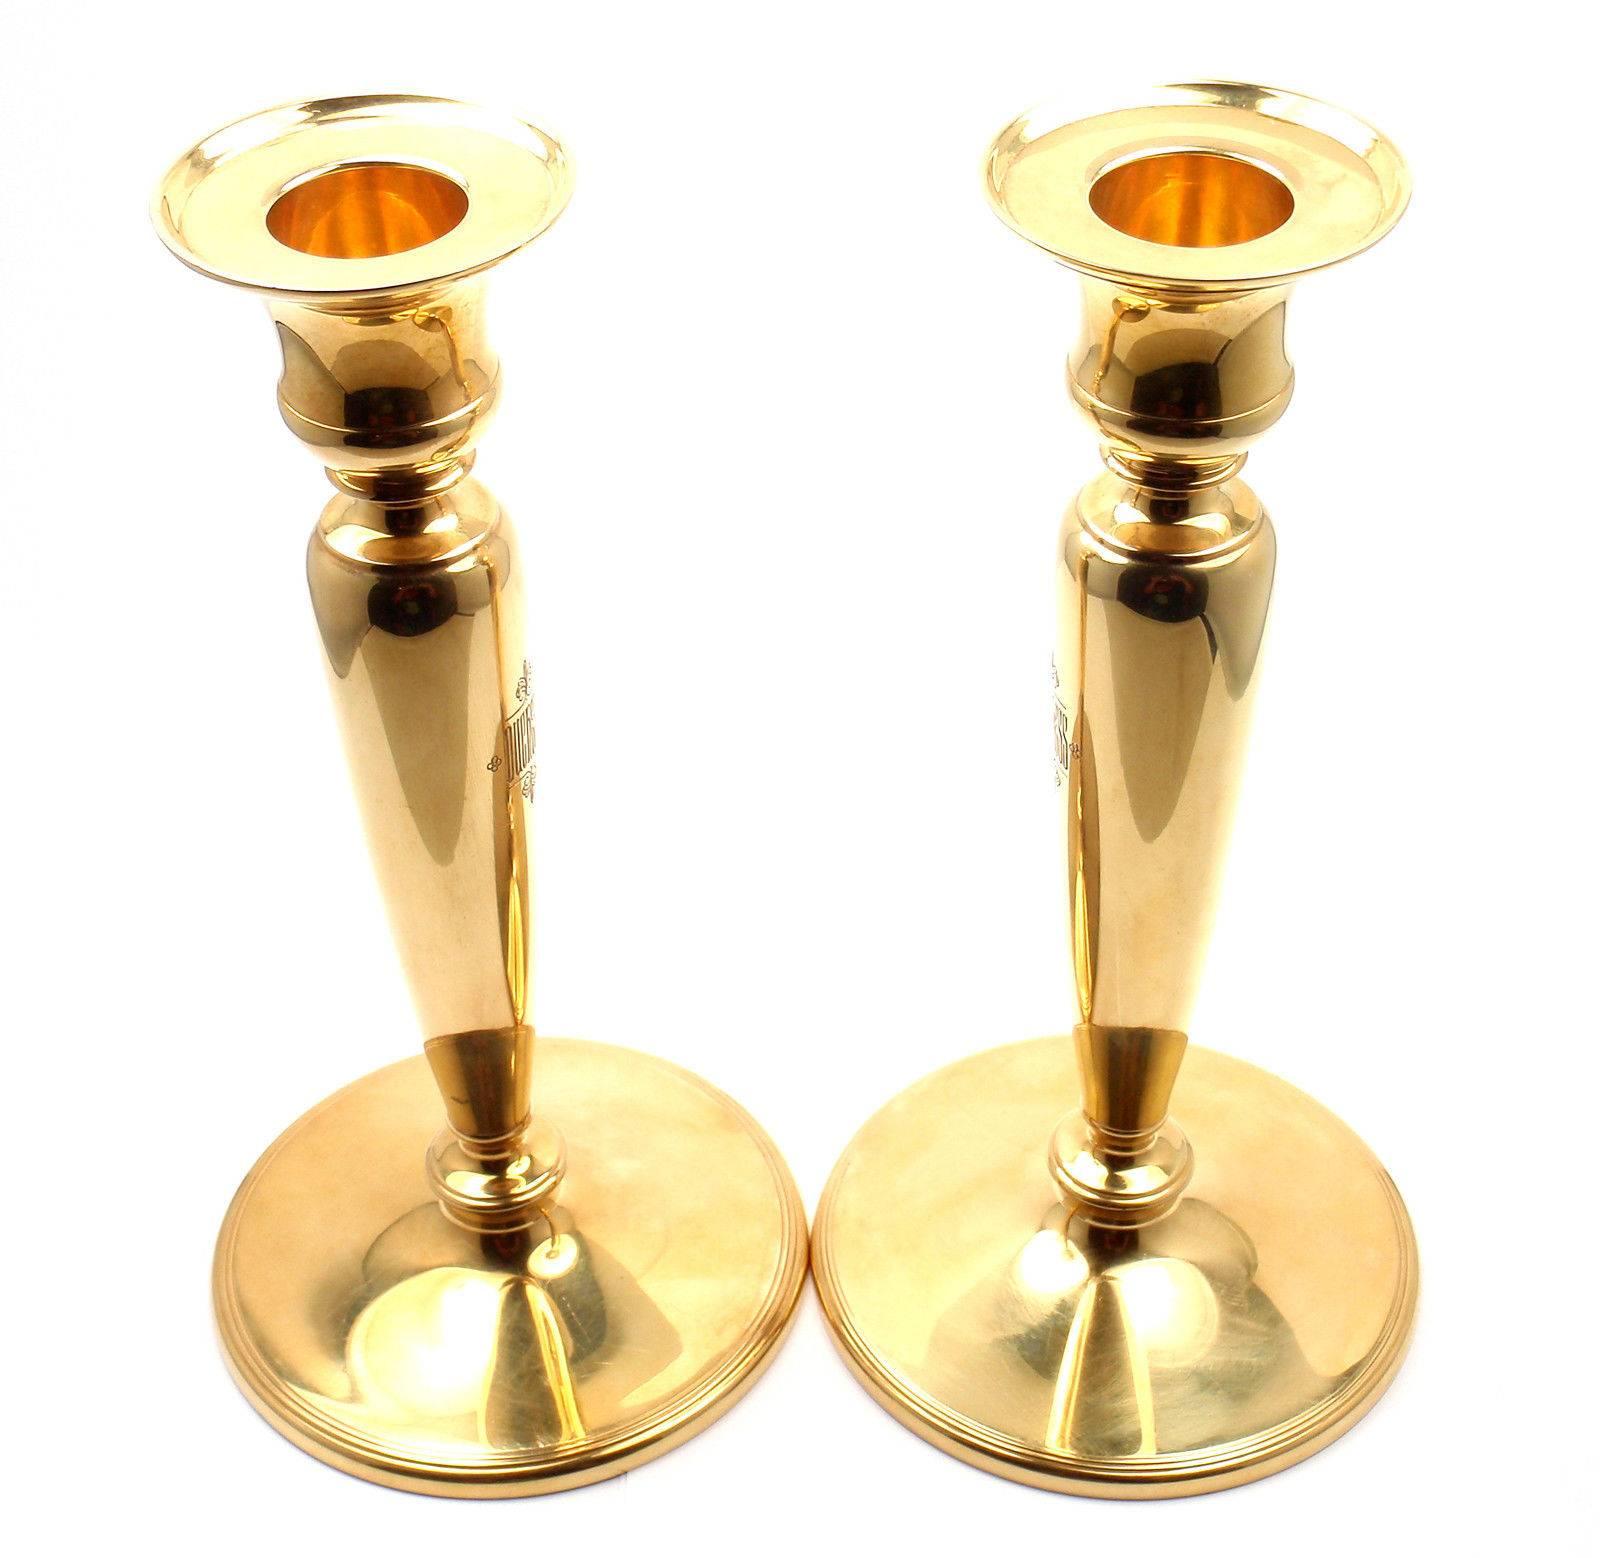 18k Solid Yellow Gold Pair Of Two Candlesticks by Tiffany & Co from their Duchess collection. 

Details: 
Measurements: 7 3/4